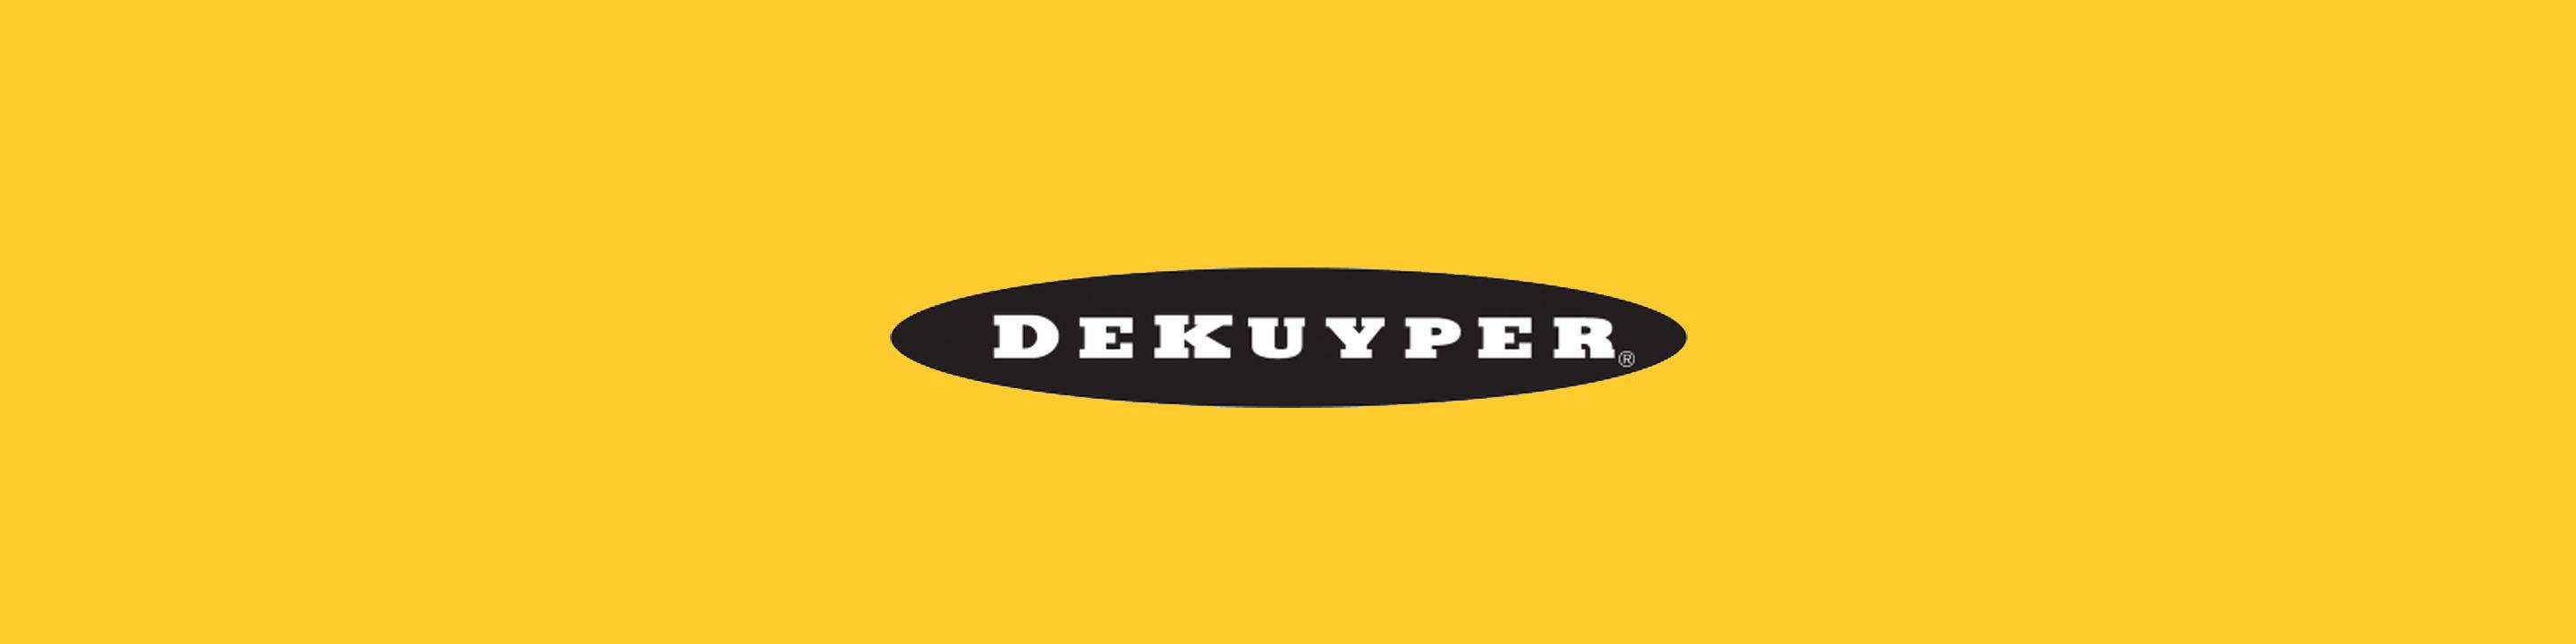 Since 1695, DeKuyper® has been the brand bartenders trust to add color, flavor, and fun to any cocktail.

Buy Dekuyper online now from nearby liquor stores via Minibar Delivery. 